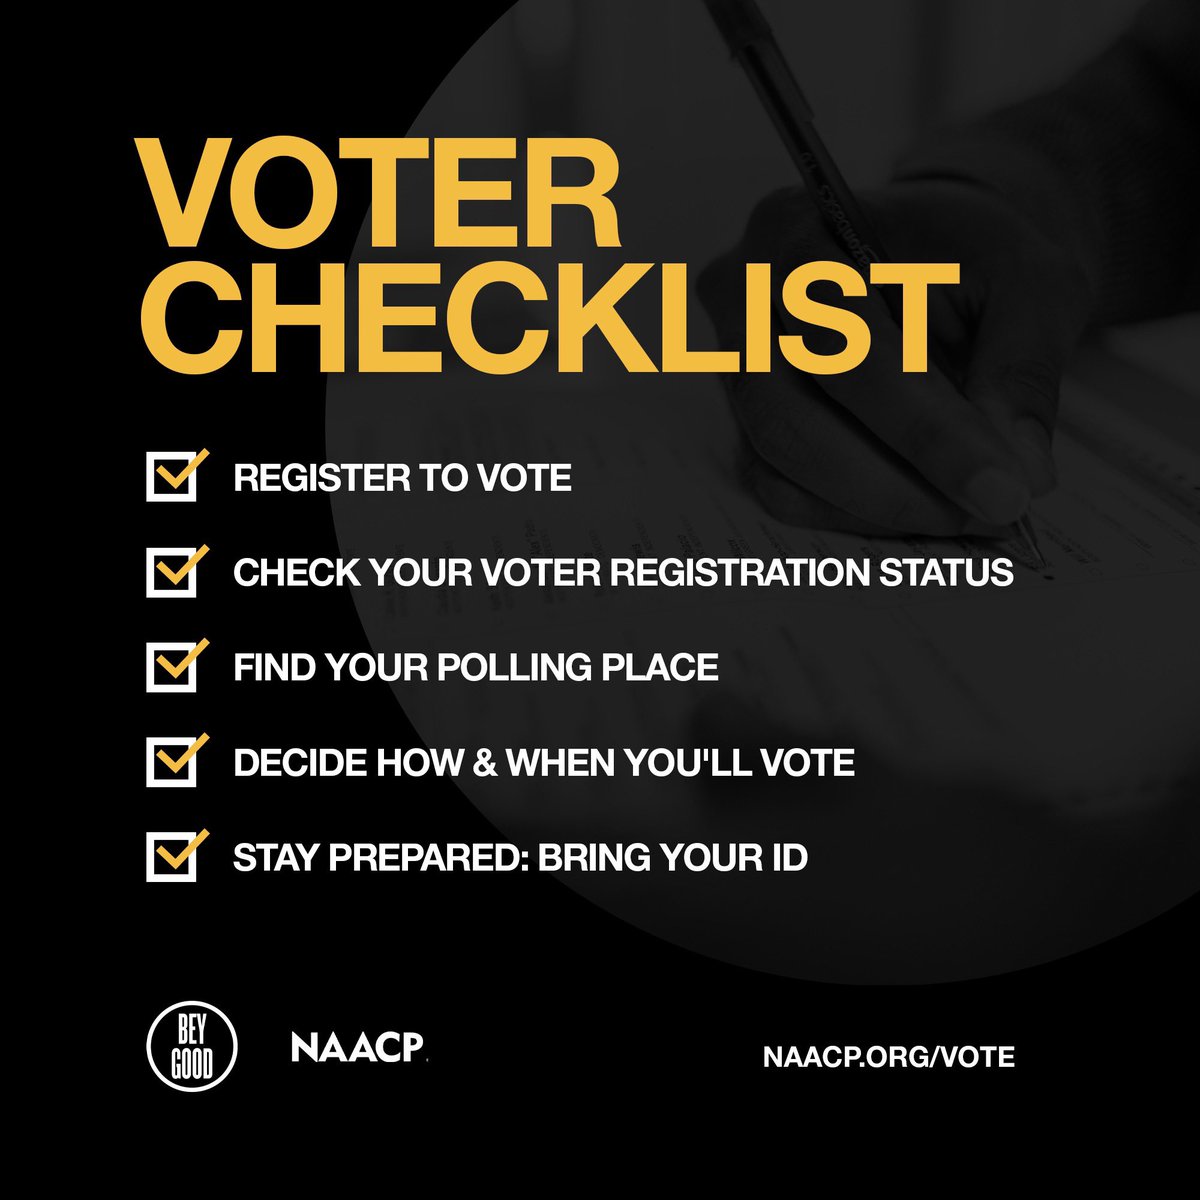 #VoteEarlyDay is here! Are you ready? Learn how you can get prepared and vote early at NAACP.ORG/VOTE. 🗳️ #TogetherPowerVote